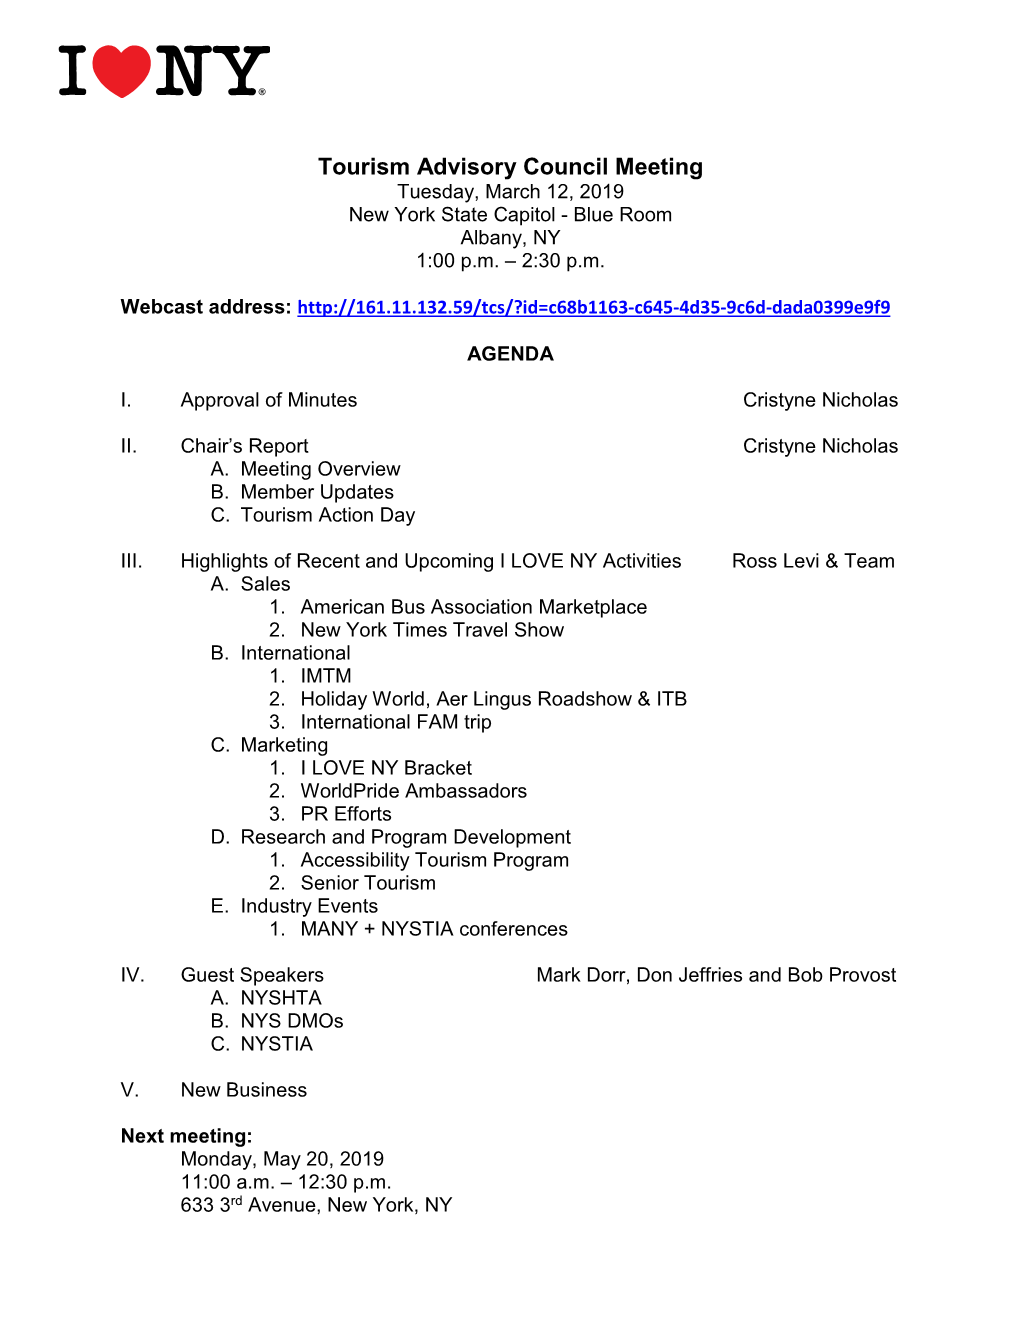 Tourism Advisory Council Meeting Tuesday, March 12, 2019 New York State Capitol - Blue Room Albany, NY 1:00 P.M